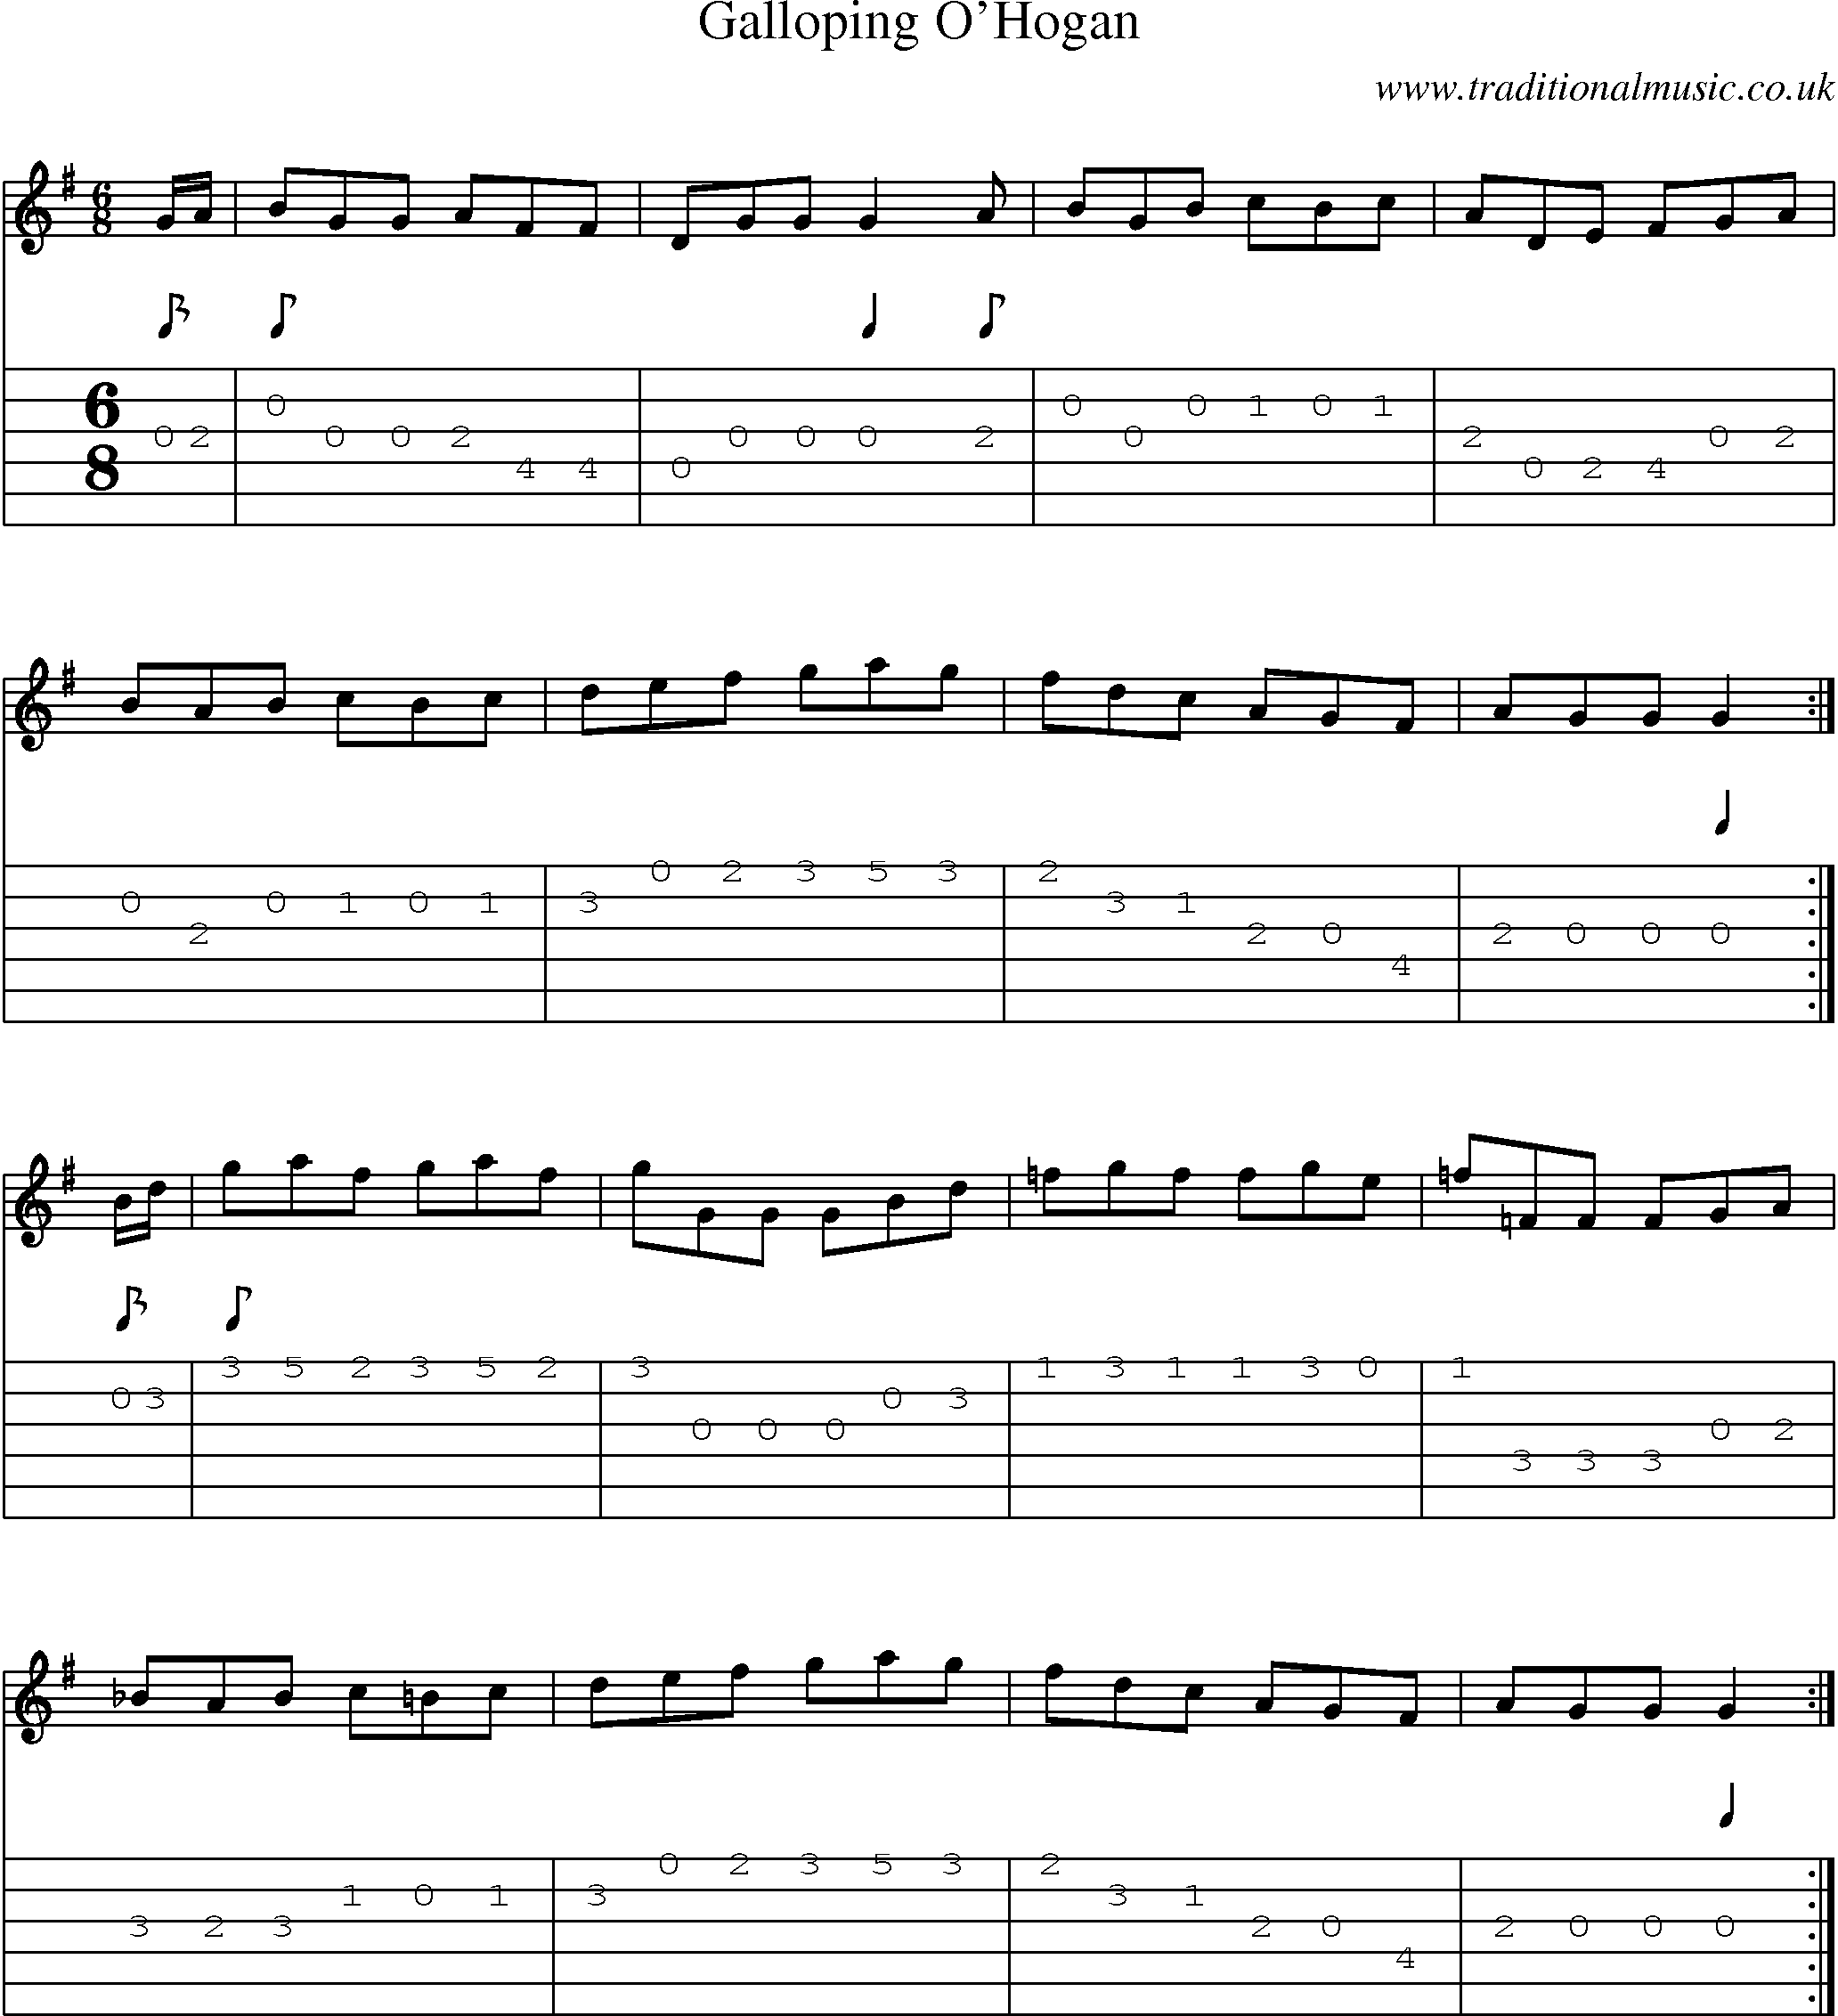 Music Score and Guitar Tabs for Galloping Ohogan